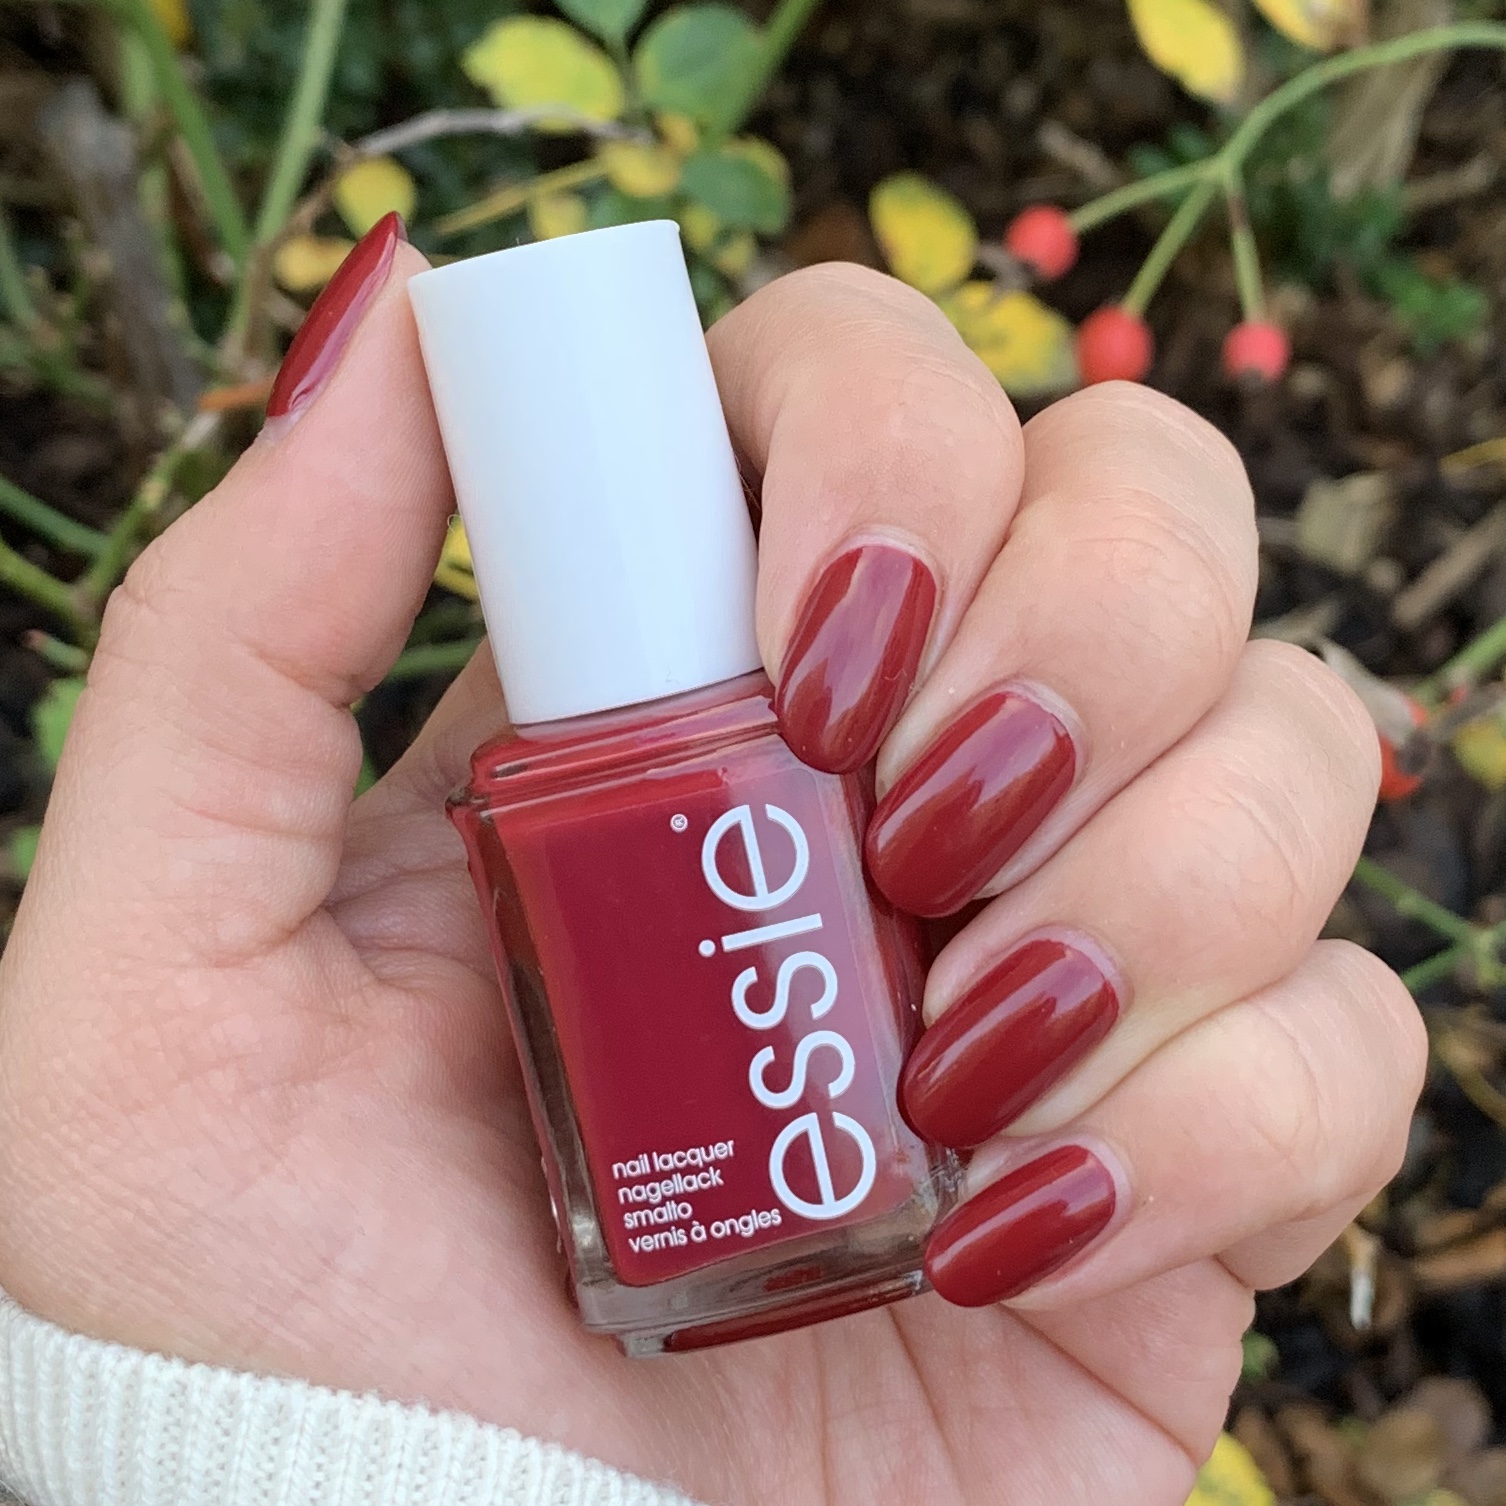 Beauty Botanik - Normal nail polish used, great for when you are needing a  break from gel nails. Essie varnish colour - Fishnet stockings  #beautybotanikproducts | Facebook